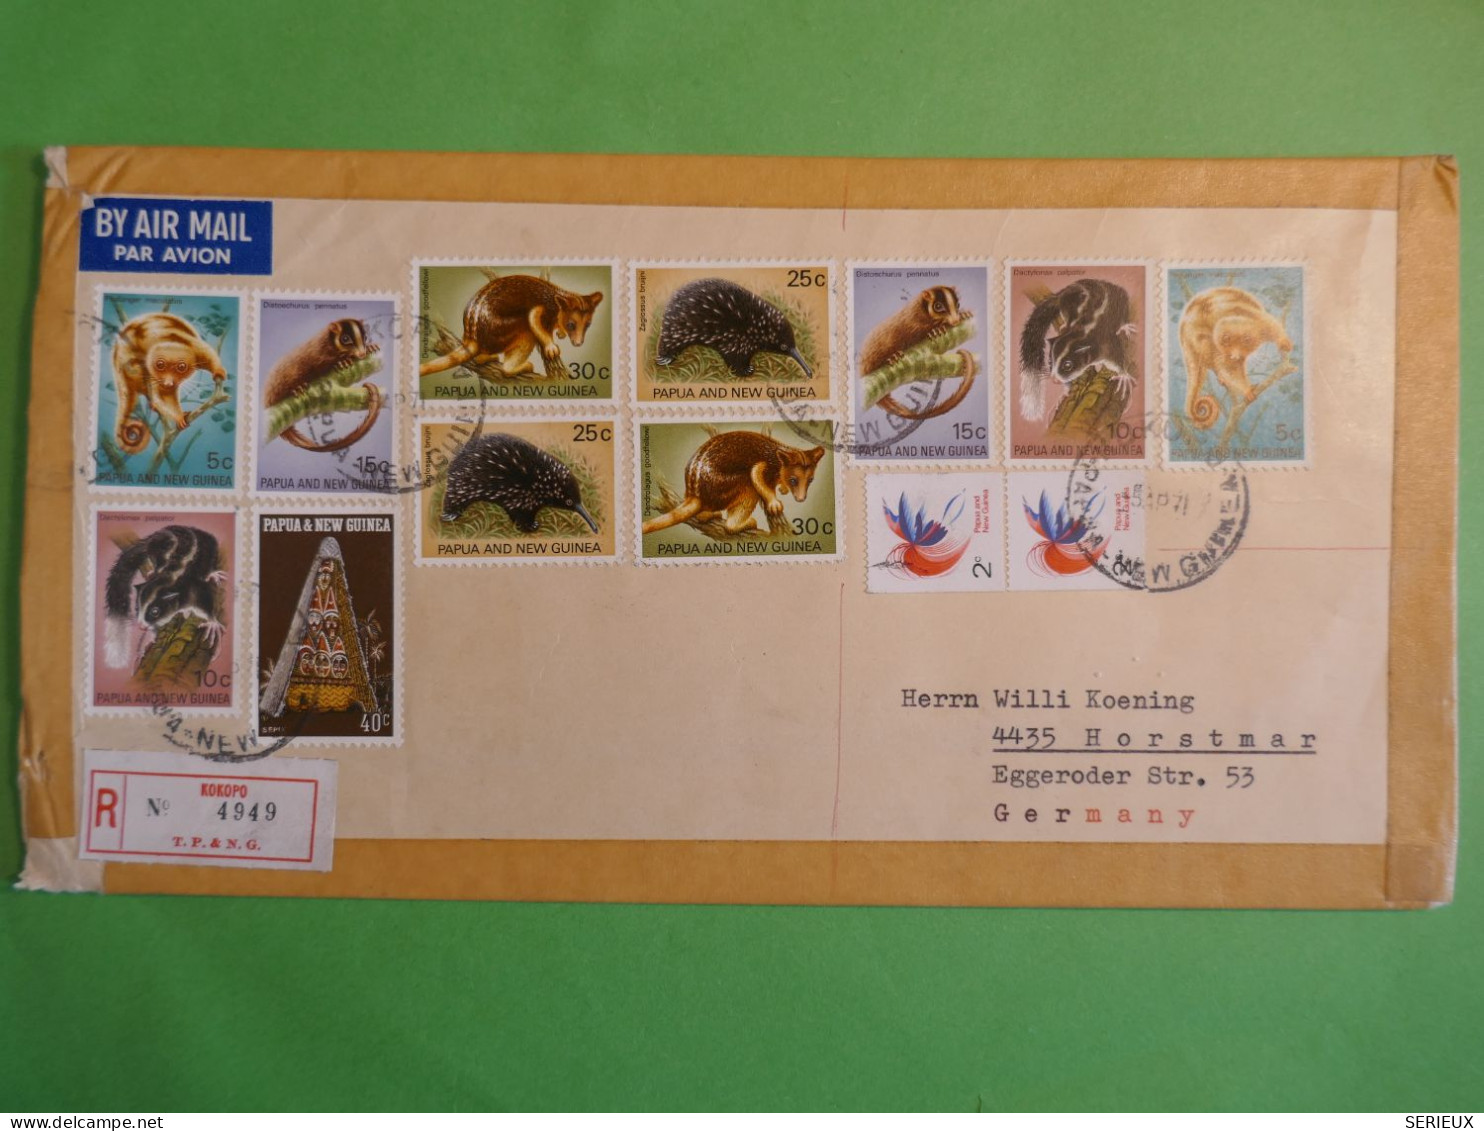 DO14 PAPOUASIE . PAPUA NEW GUINEA  RARE FINE LETTER  1971  ROKOPO  A  ROTSMAR  GERMANY +ANIMALS   + AFF. GREAT +++++ - Papouasie-Nouvelle-Guinée